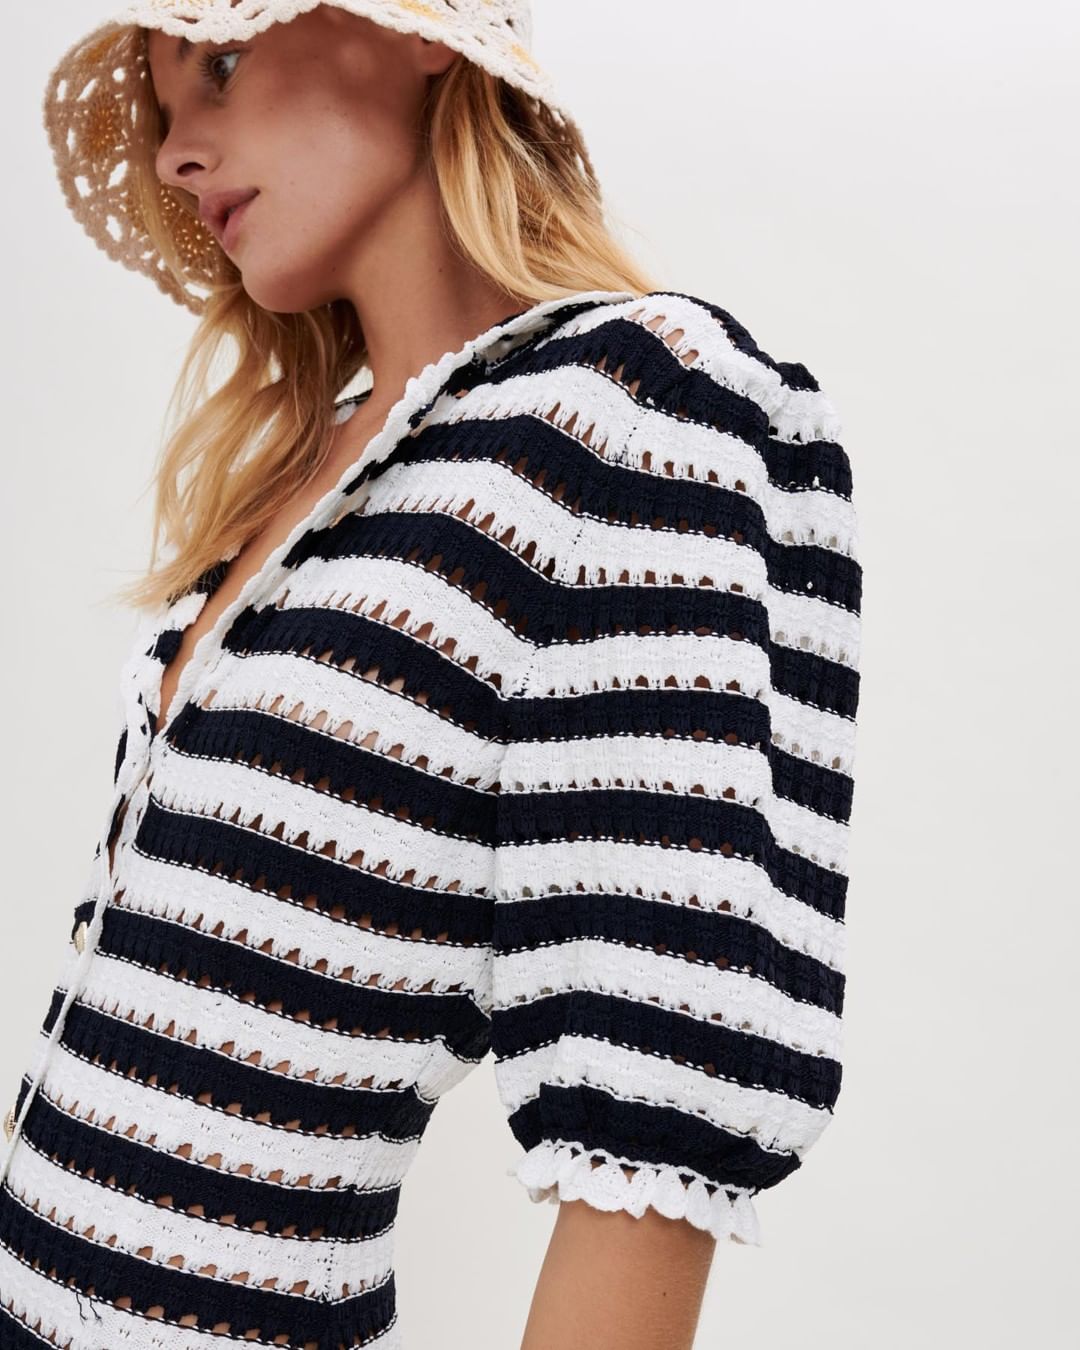 Black and white striped knit sweater with puffy sleeves.